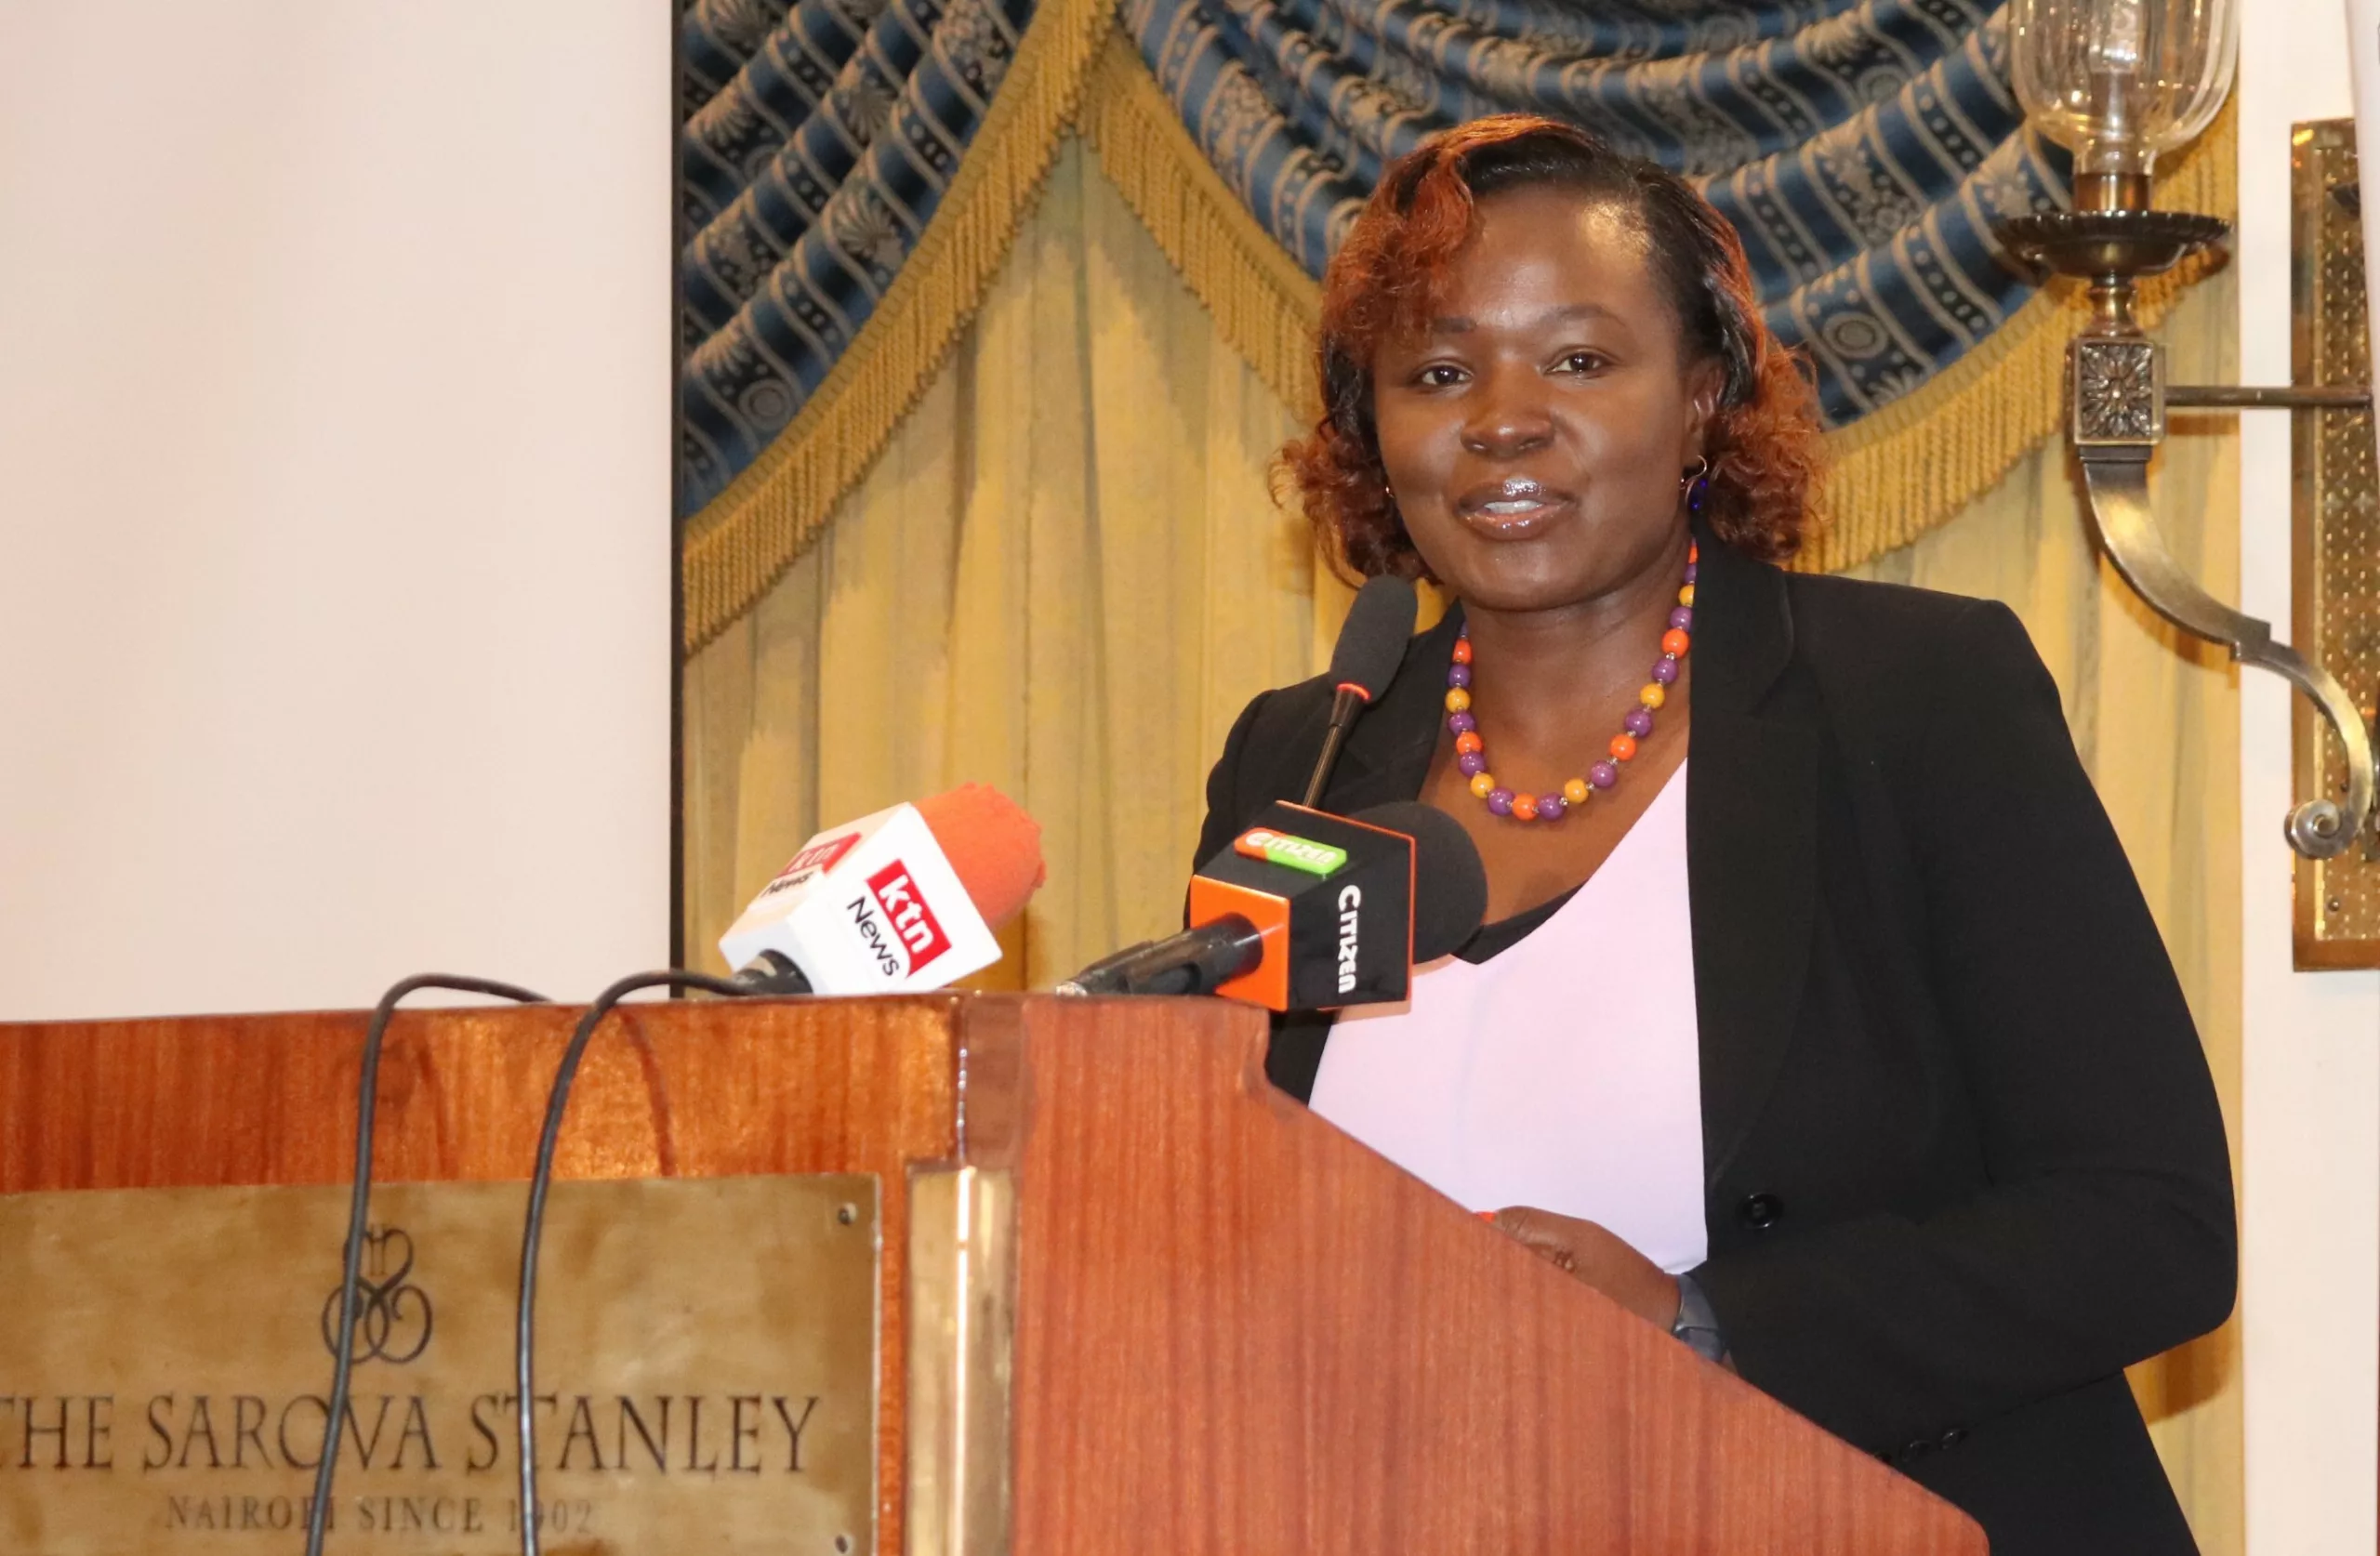 Work with scientists to tell agriculture success stories, Kenya Editors’ Guild tells scribes